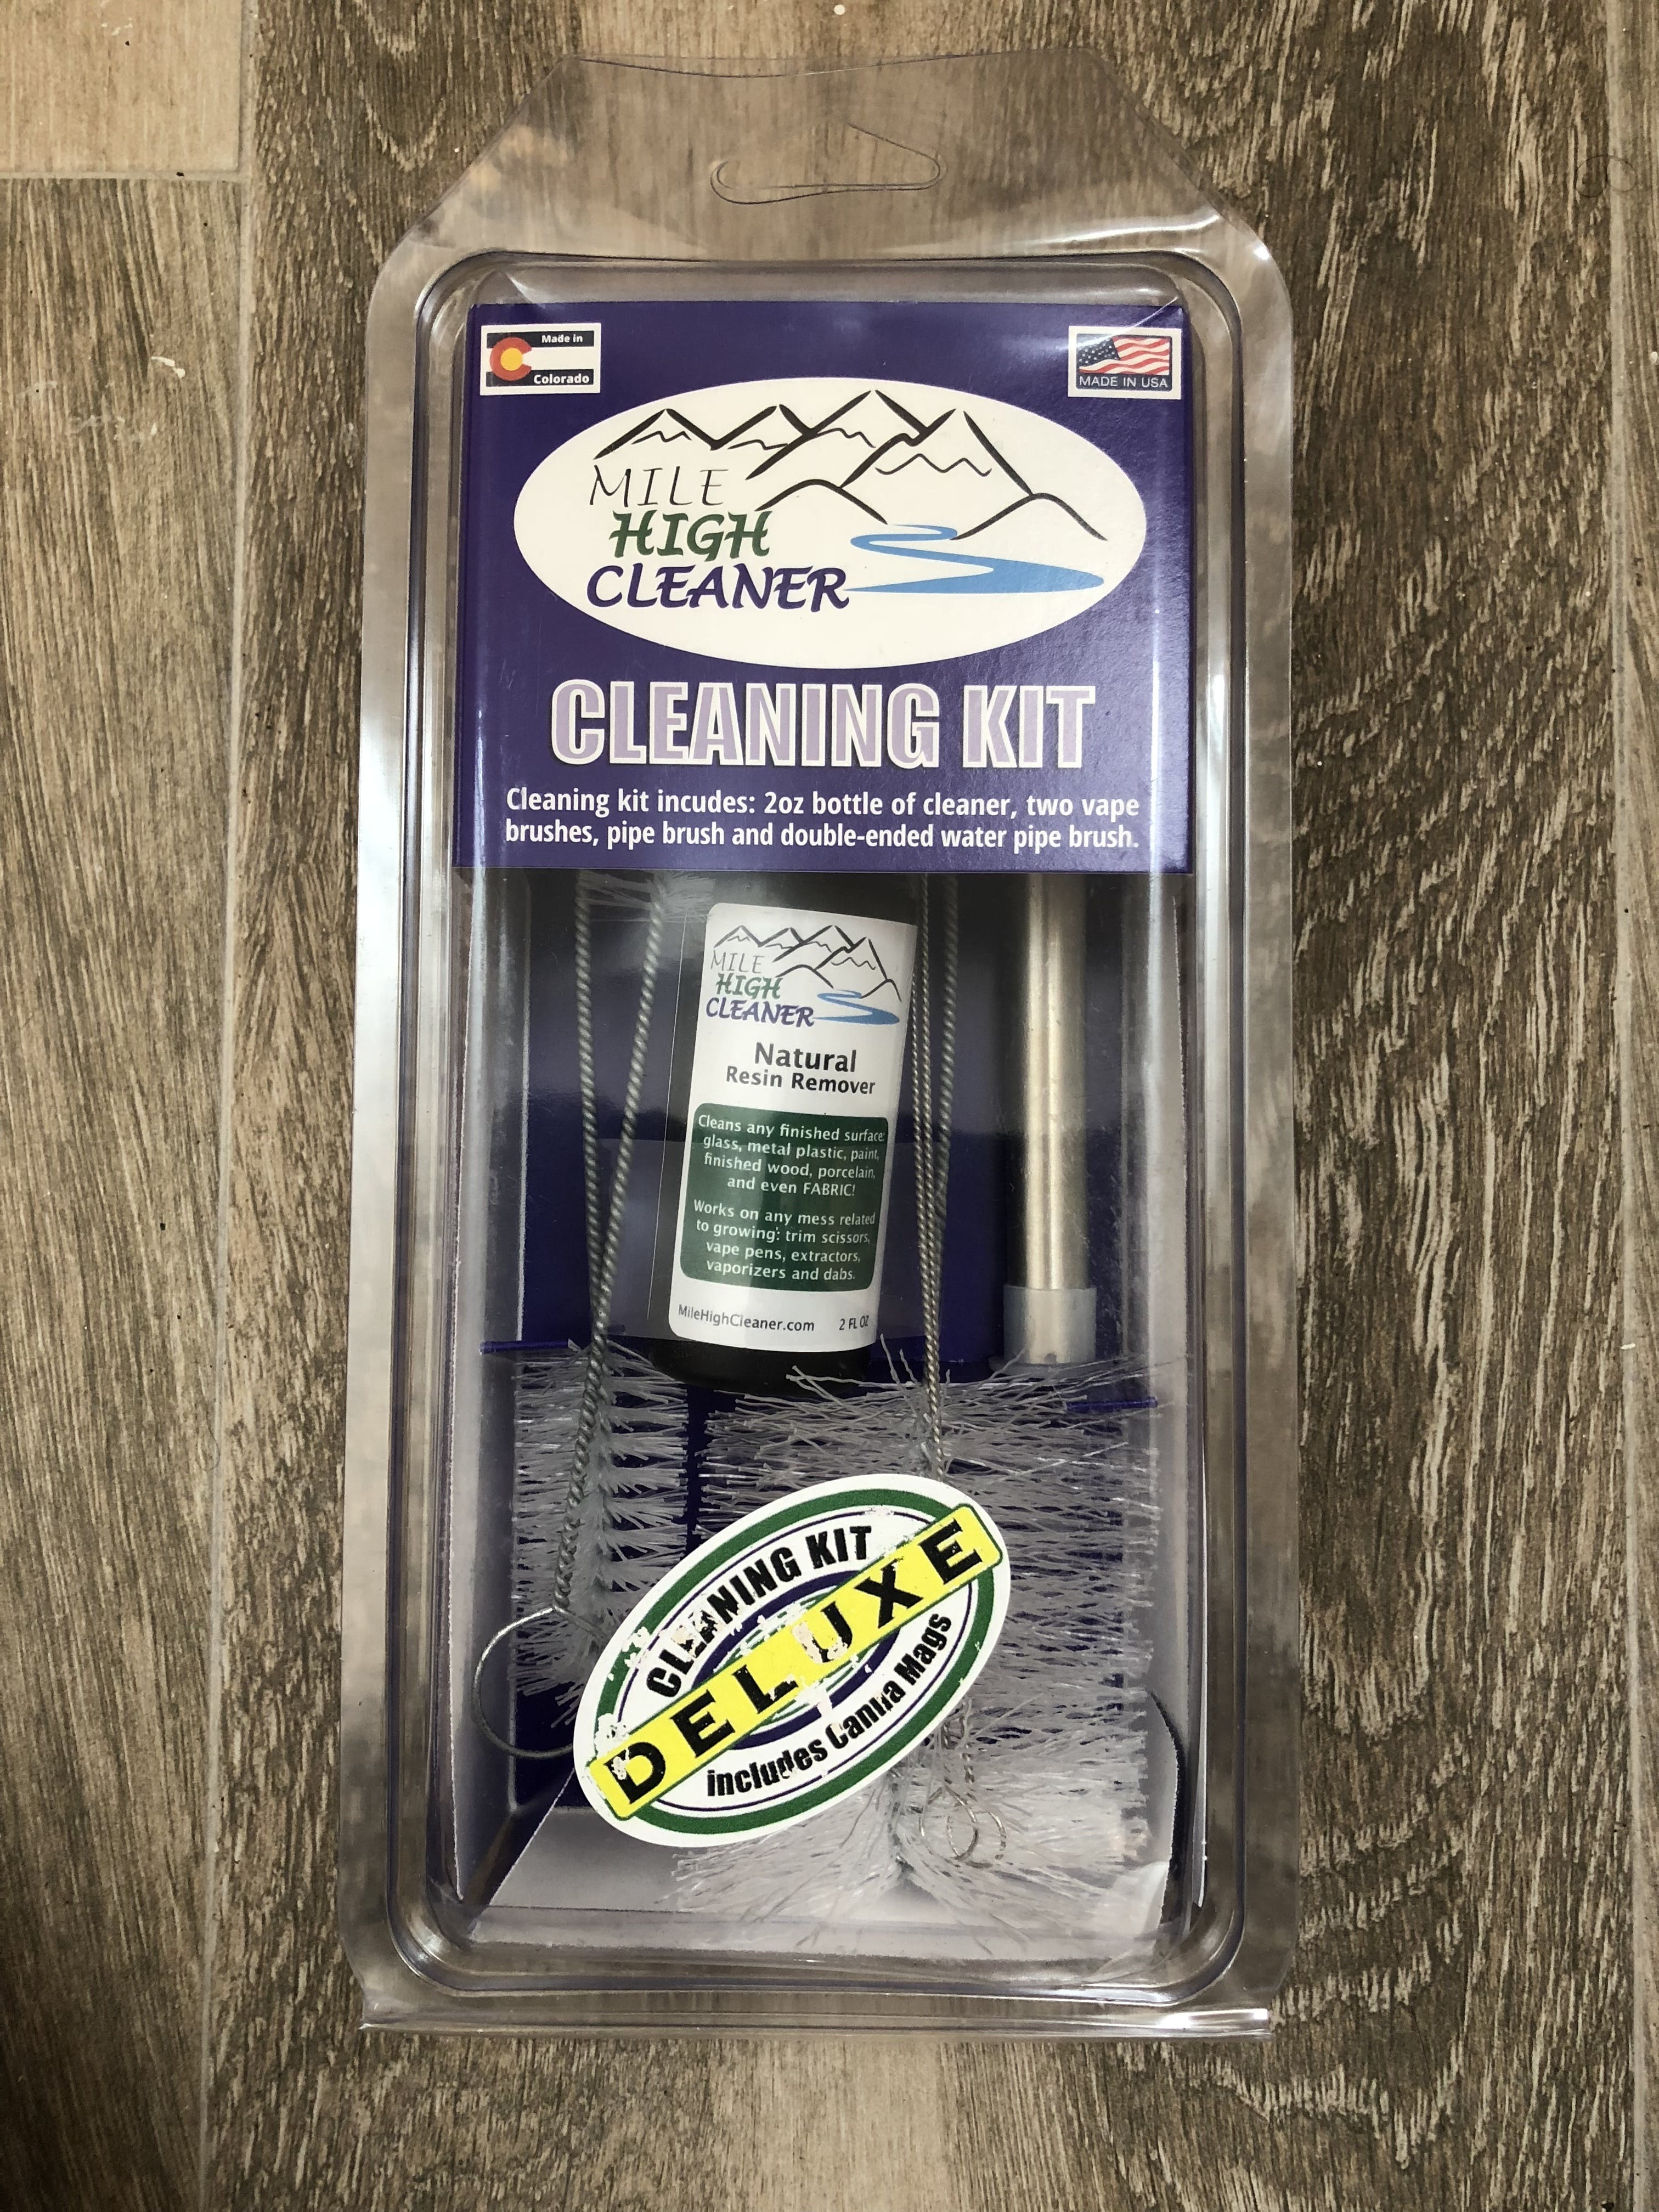 gear-mile-high-cleaner-cleaning-kit